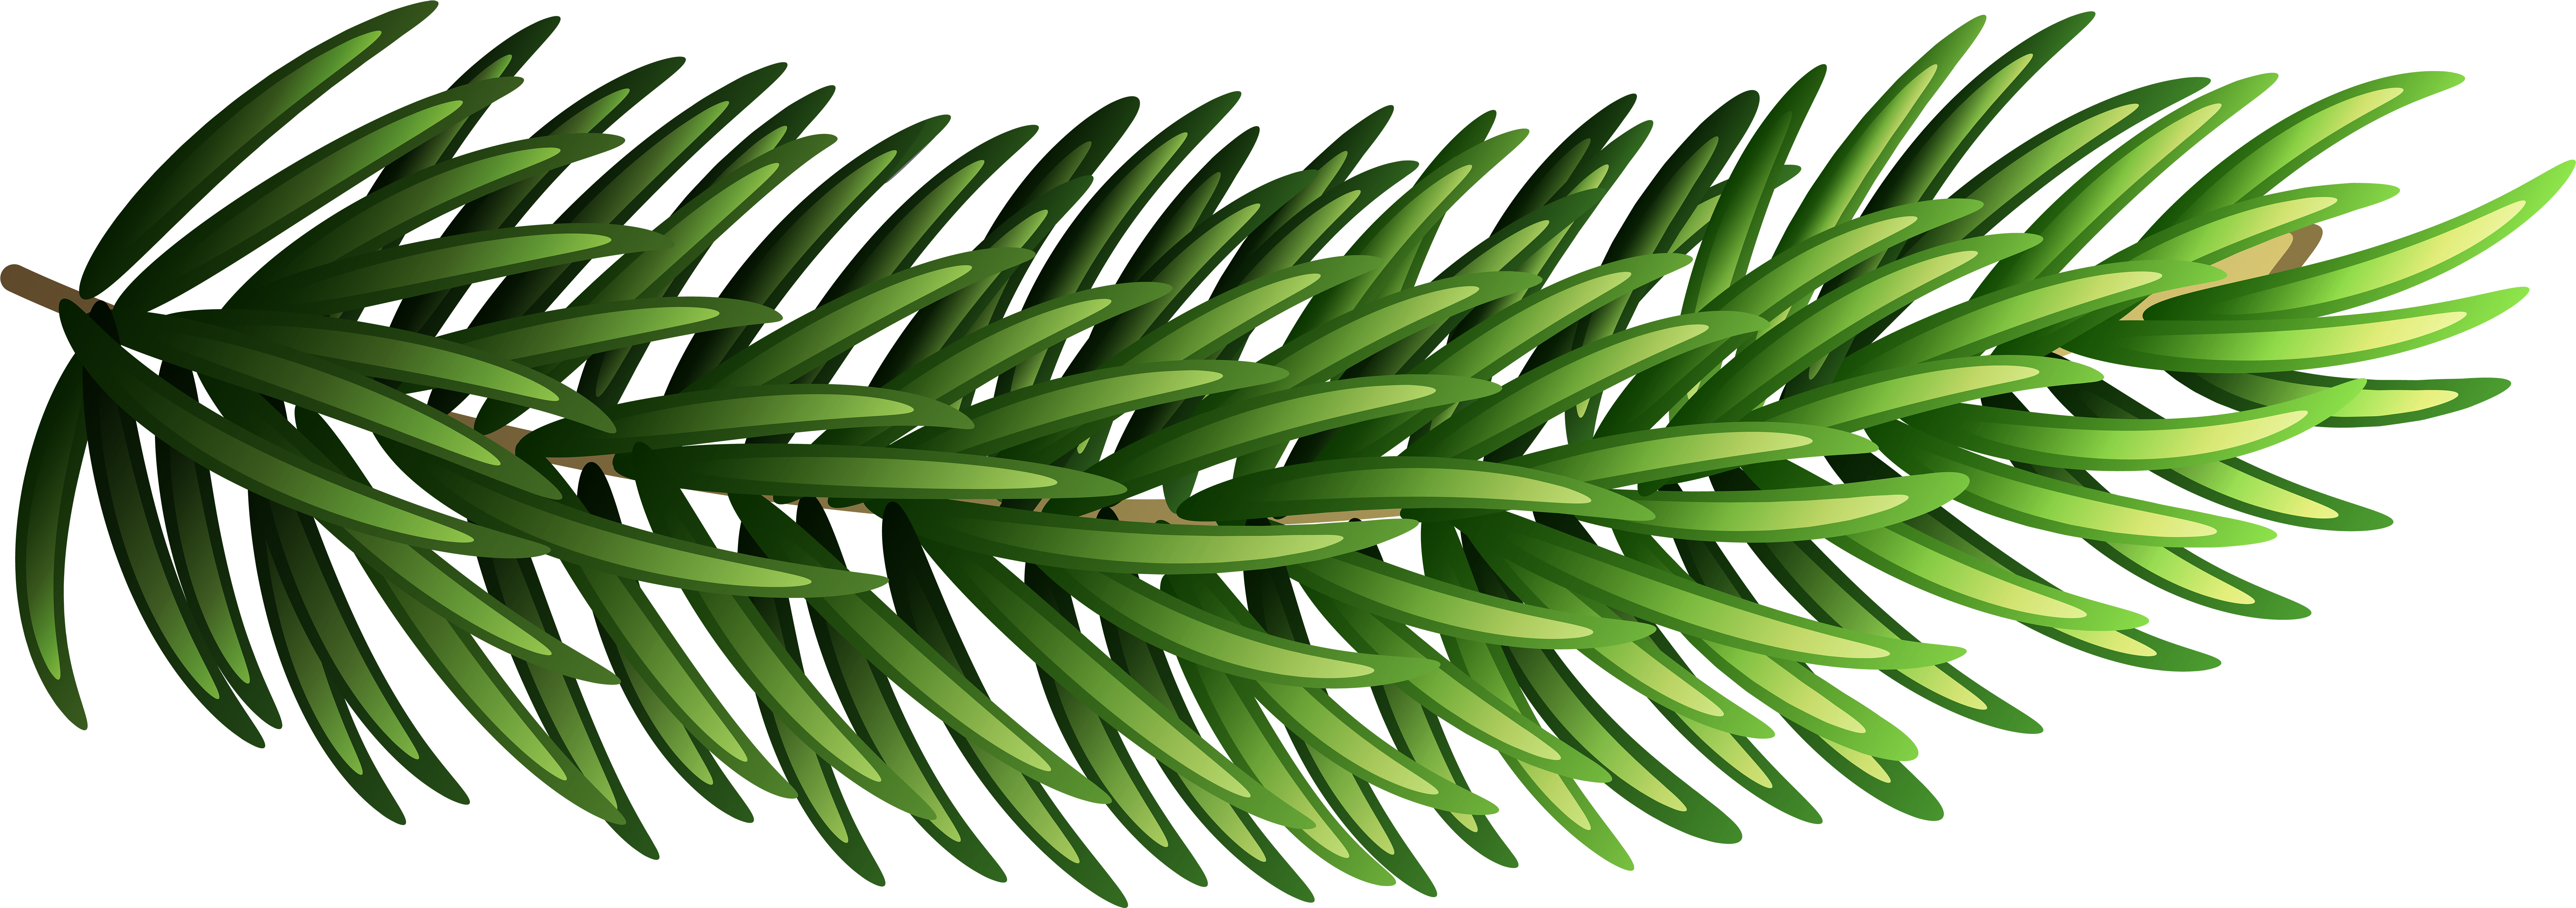 Pine Tree Branches Decor Clip Art Image​  Gallery Yopriceville -  High-Quality Free Images and Transparent PNG Clipart